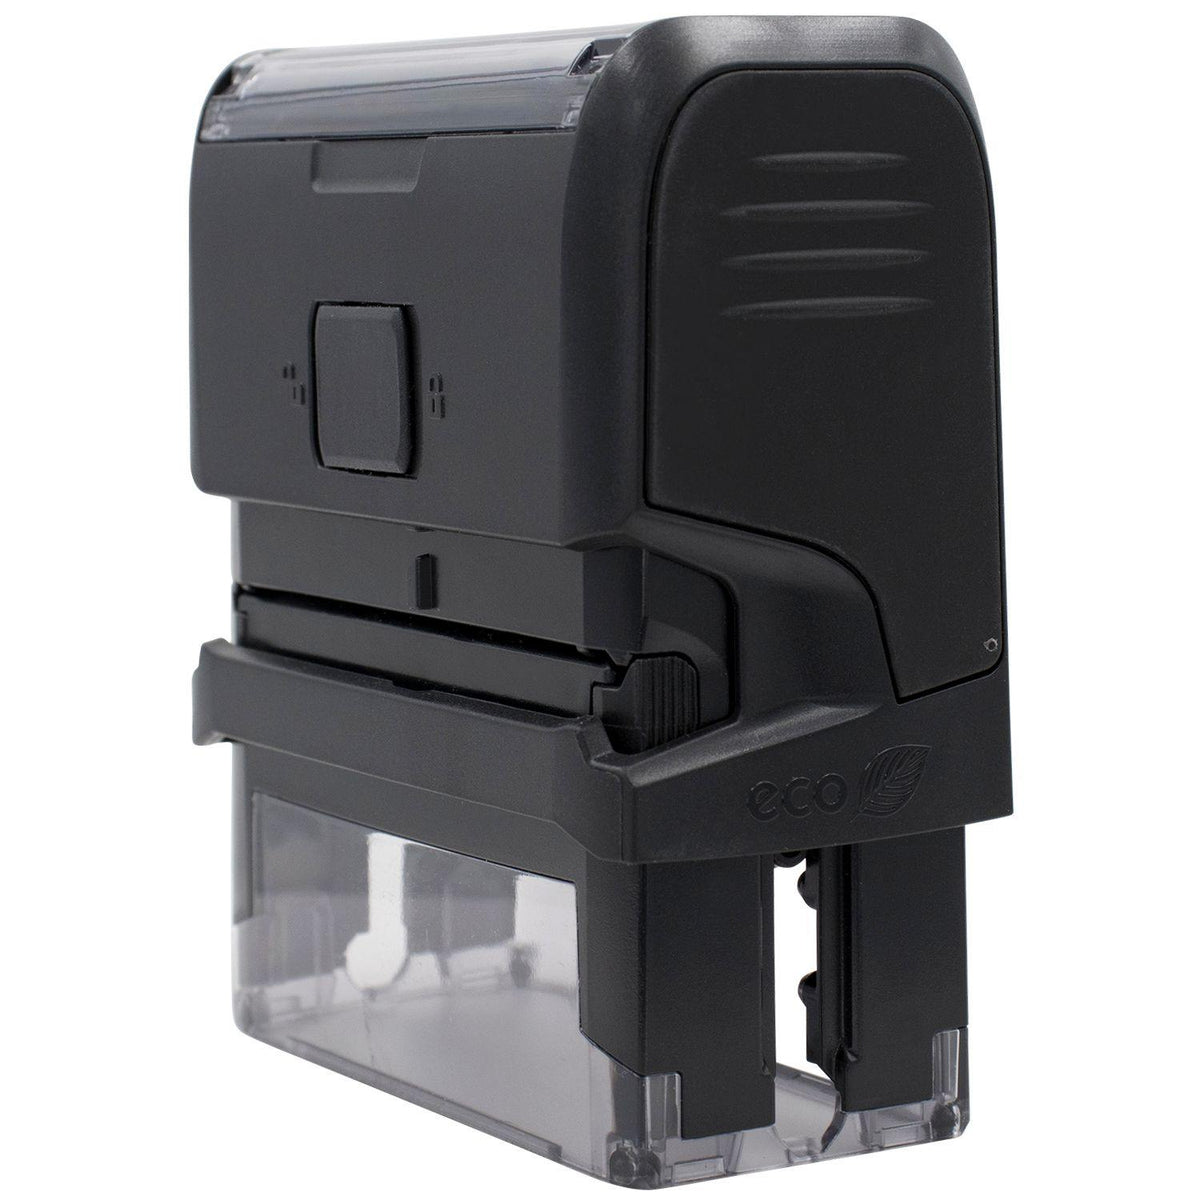 Self-Inking Bold COD Stamp Stamp - Engineer Seal Stamps - Brand_Trodat, Impression Size_Small, Stamp Type_Self-Inking Stamp, Type of Use_Finance, Type of Use_General, Type of Use_Office, Type of Use_Shipping &amp; Receiving